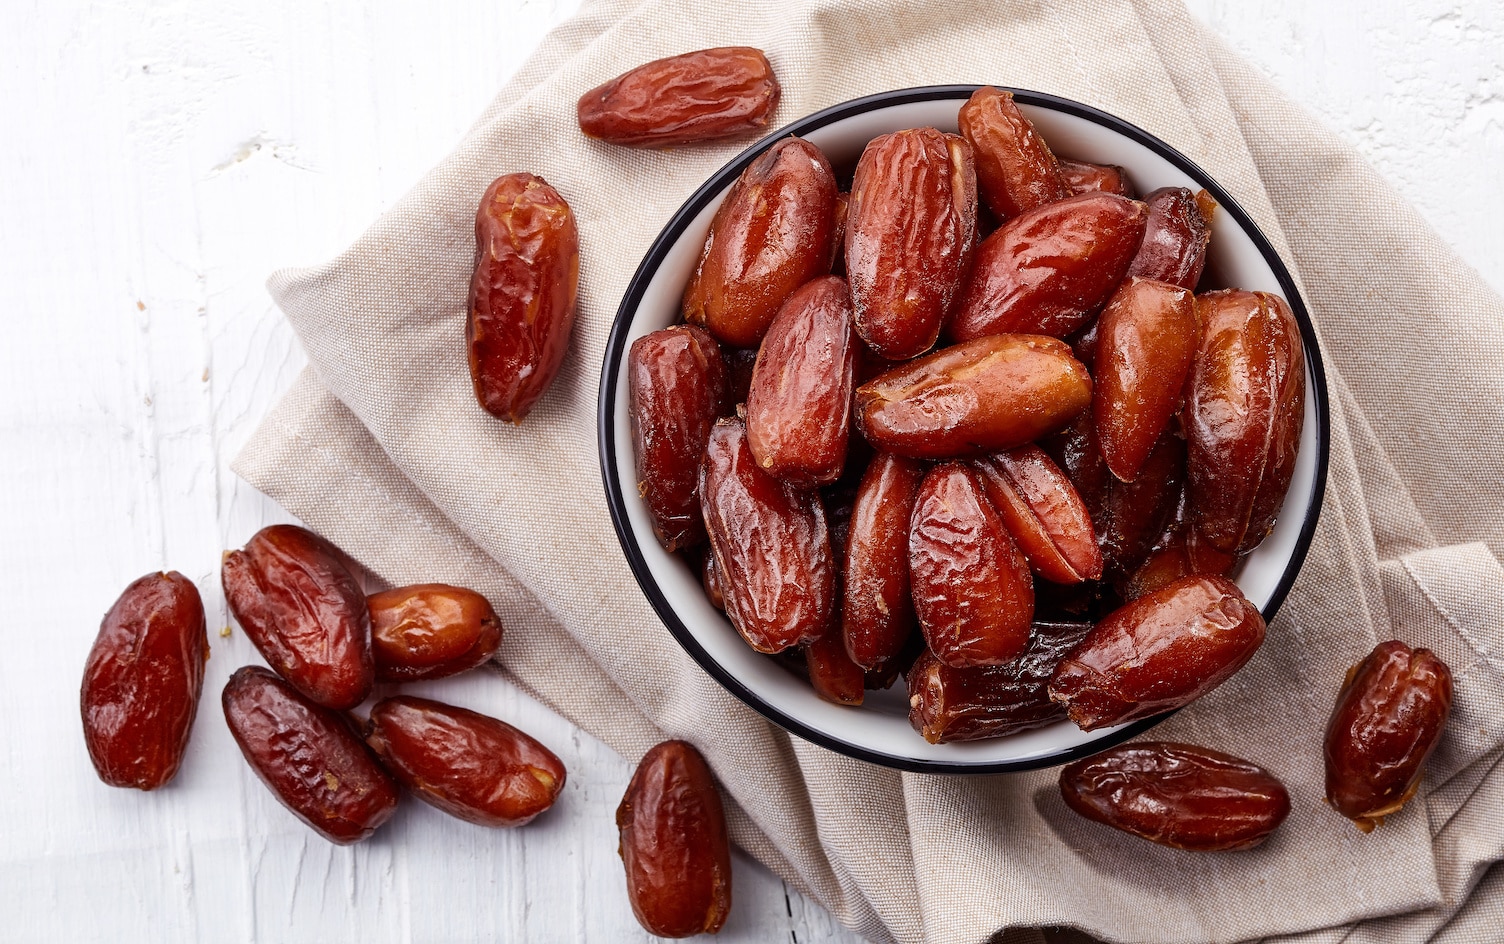 How To Eat Dates: 10 Drool-Worthy Ways